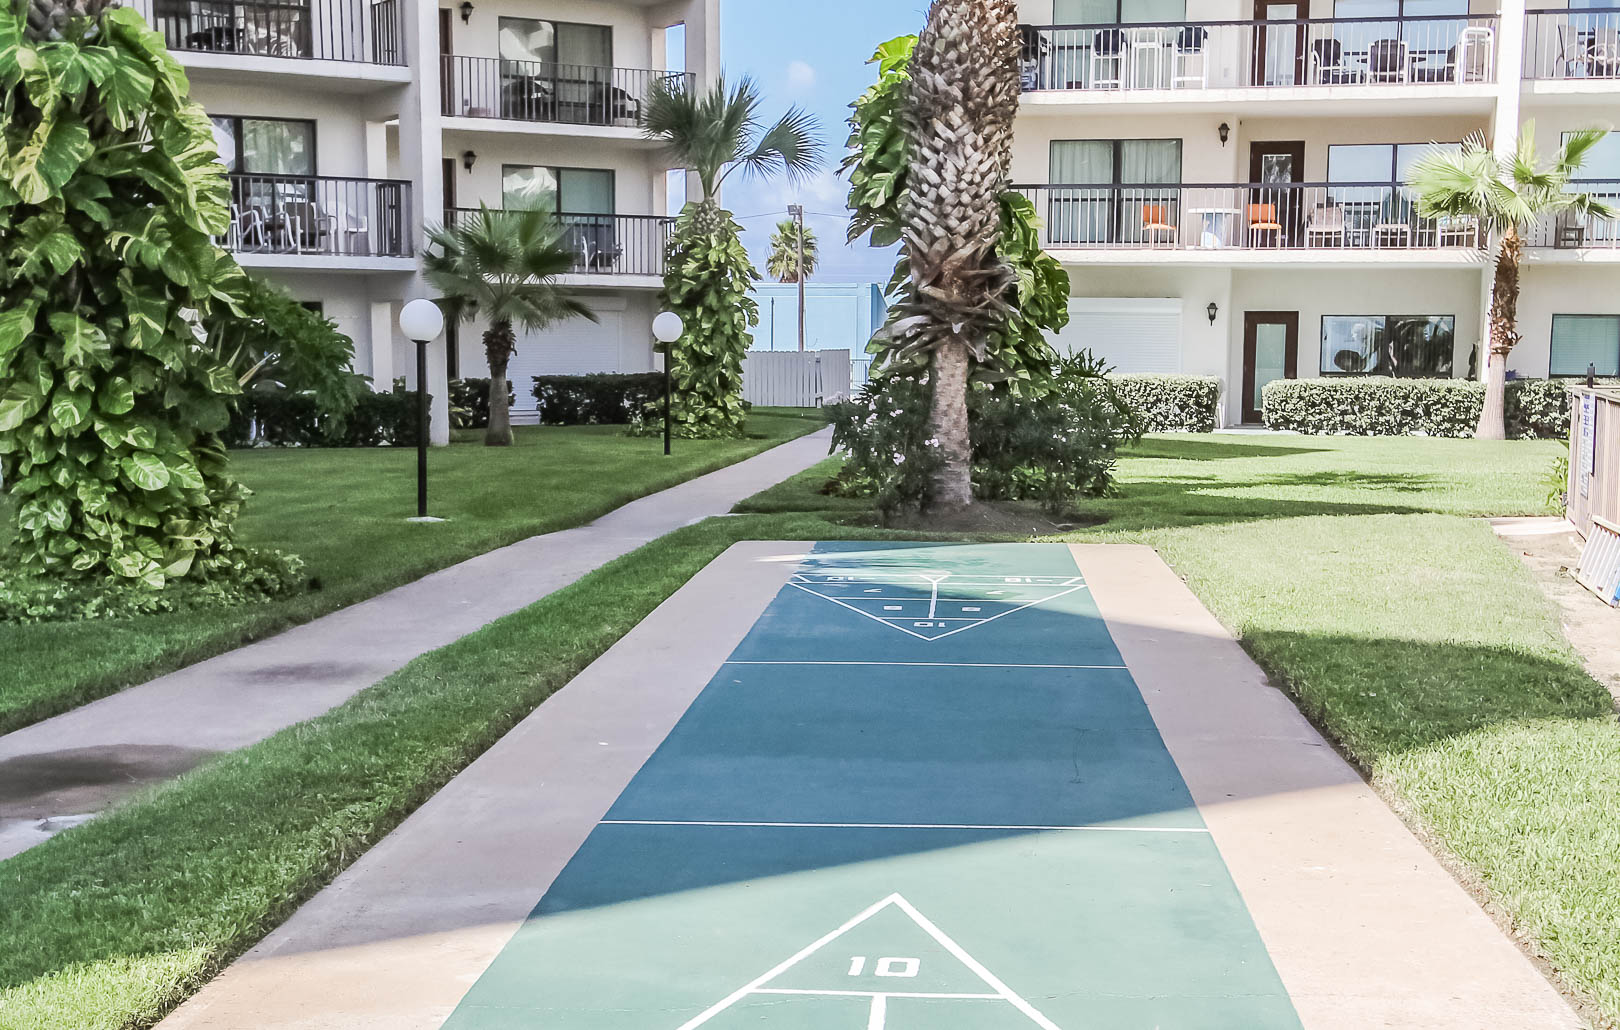 Outdoor amenities at VRI's Royale Beach and Tennis Club.